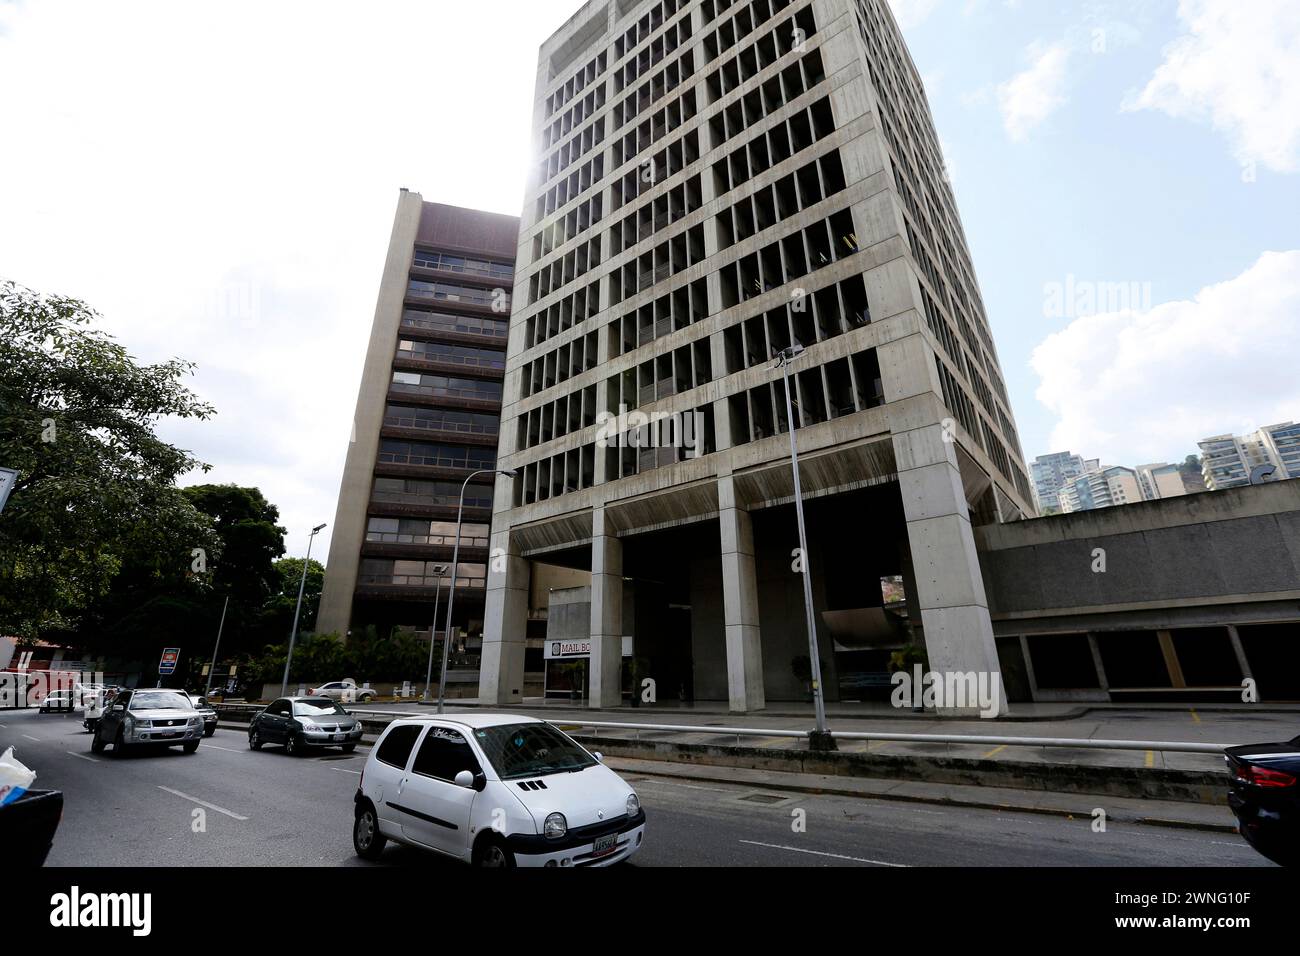 Caracas, Venezuela - may 06, 2014 - view of car traffic and buildings on one of the main roads in Caracas, Venezuela Stock Photo